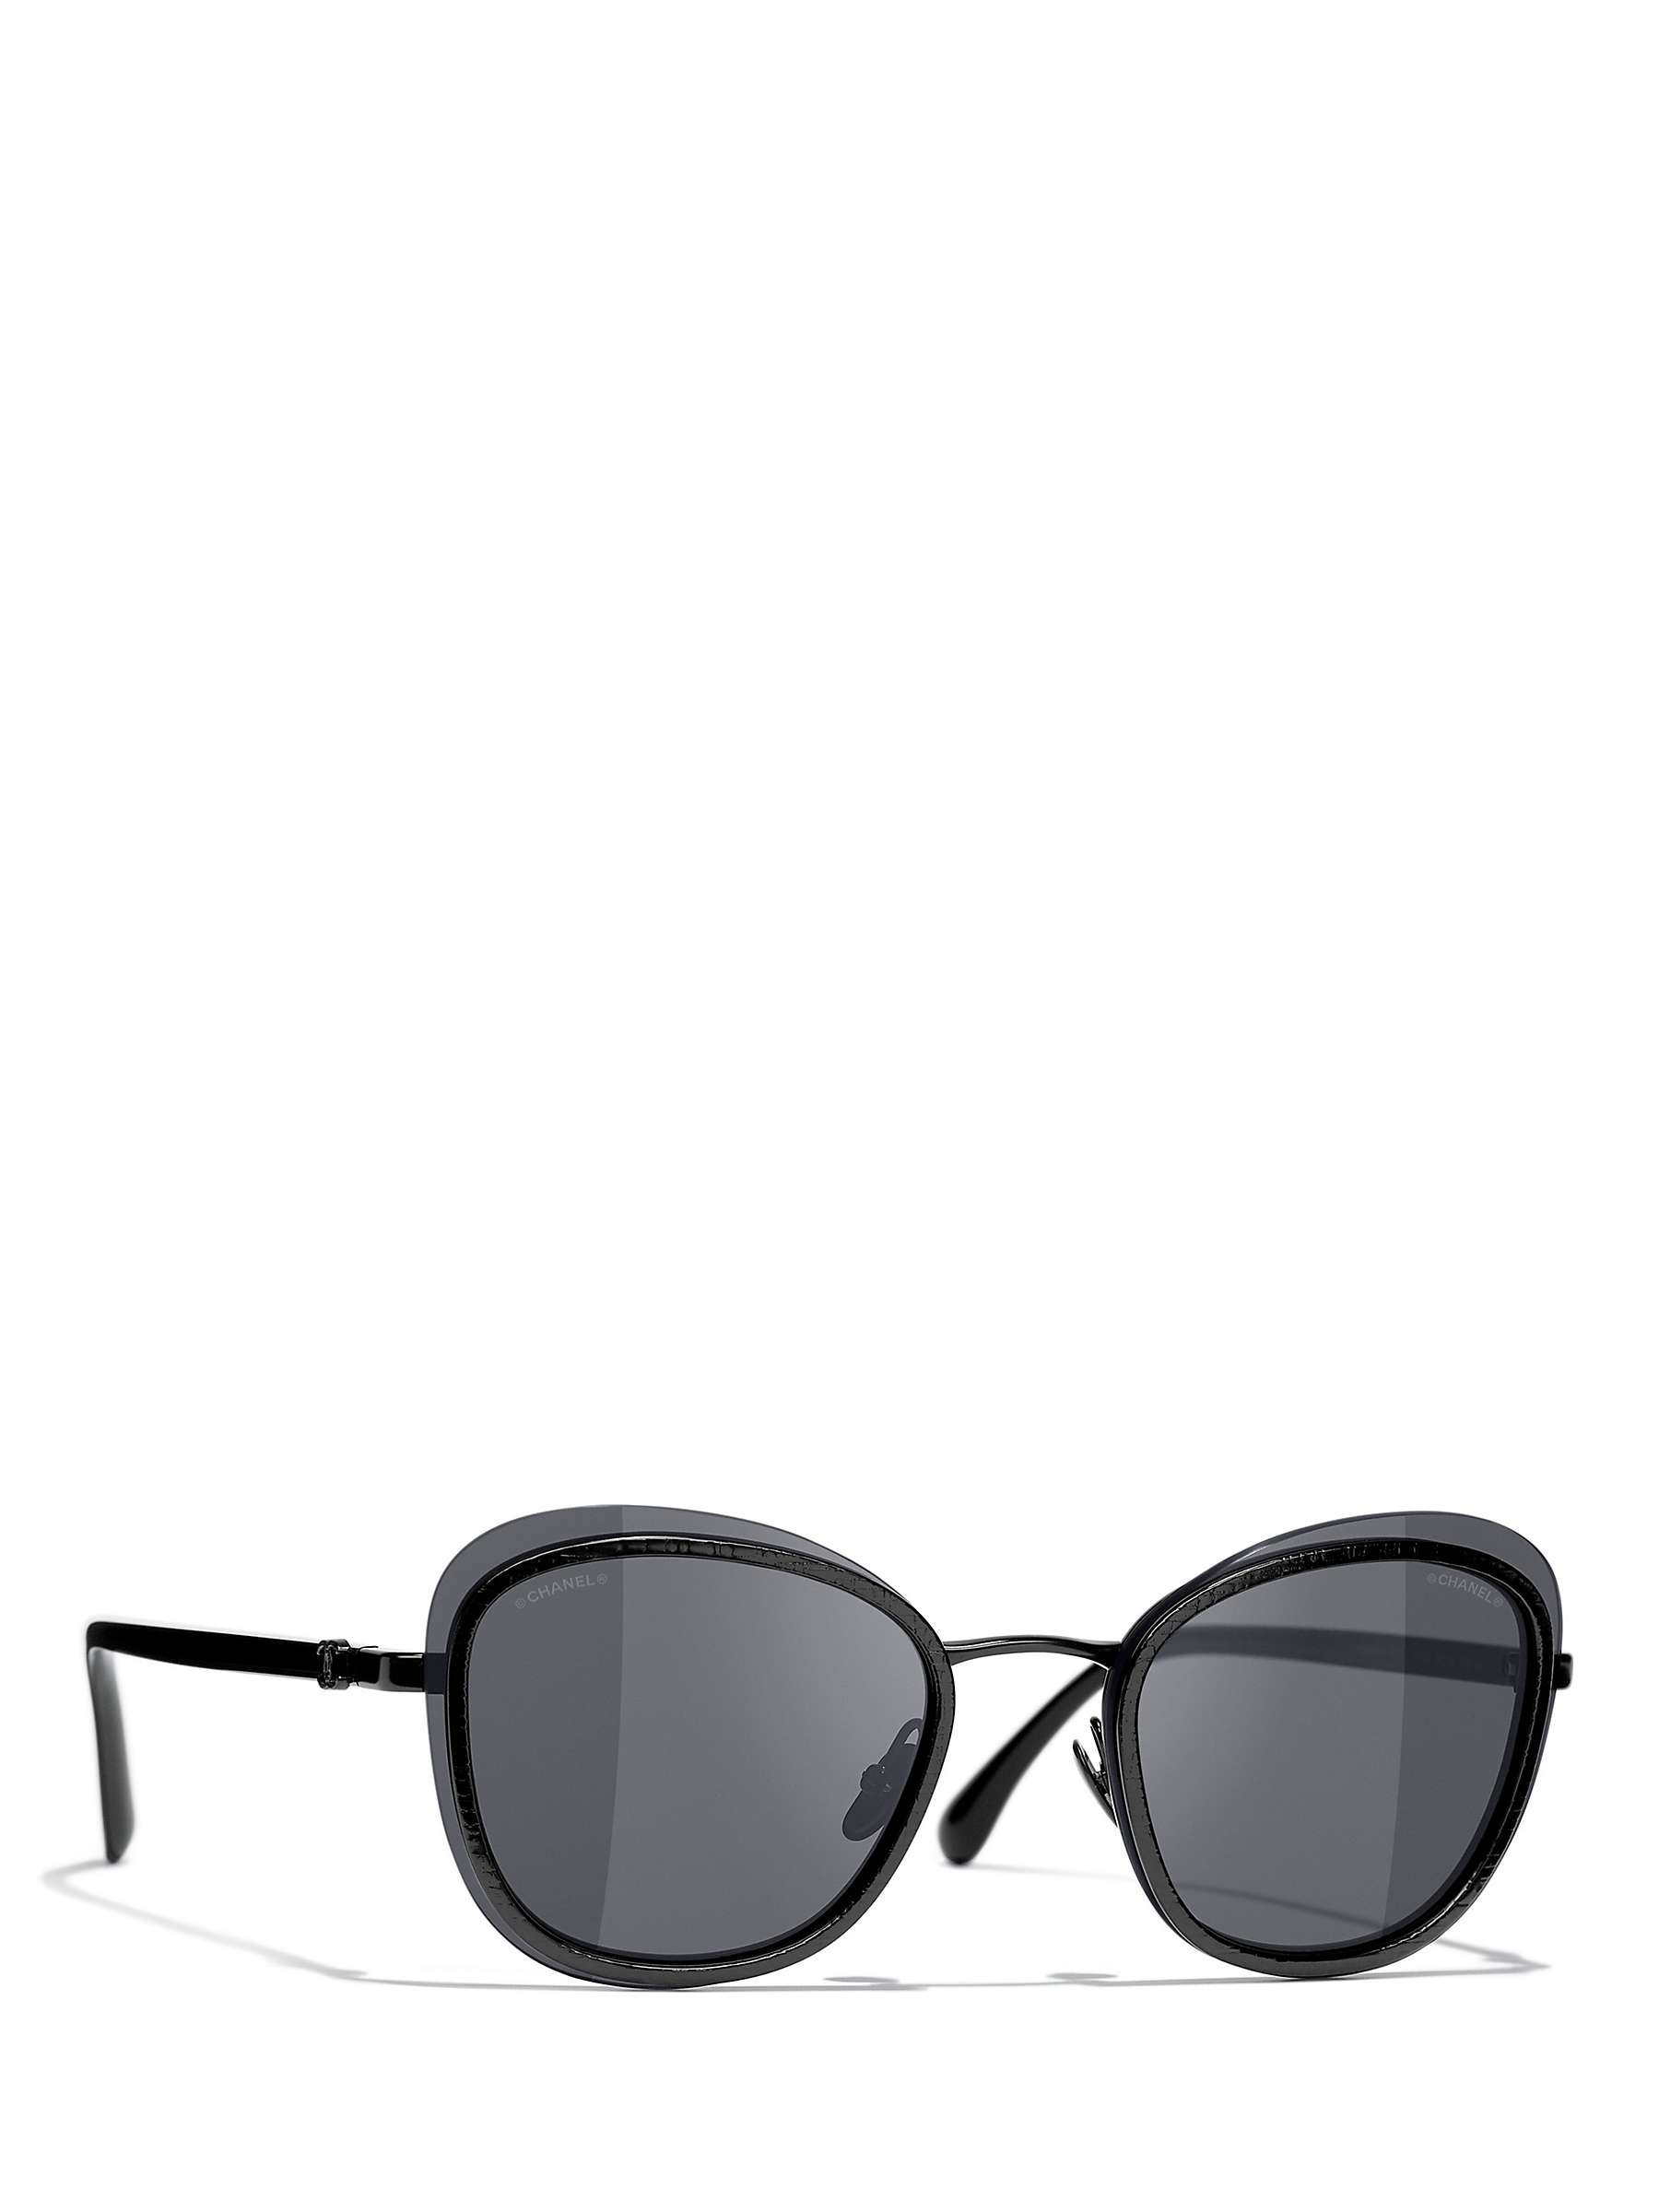 Buy CHANEL Oval Sunglasses CH4264 Black/Green Online at johnlewis.com